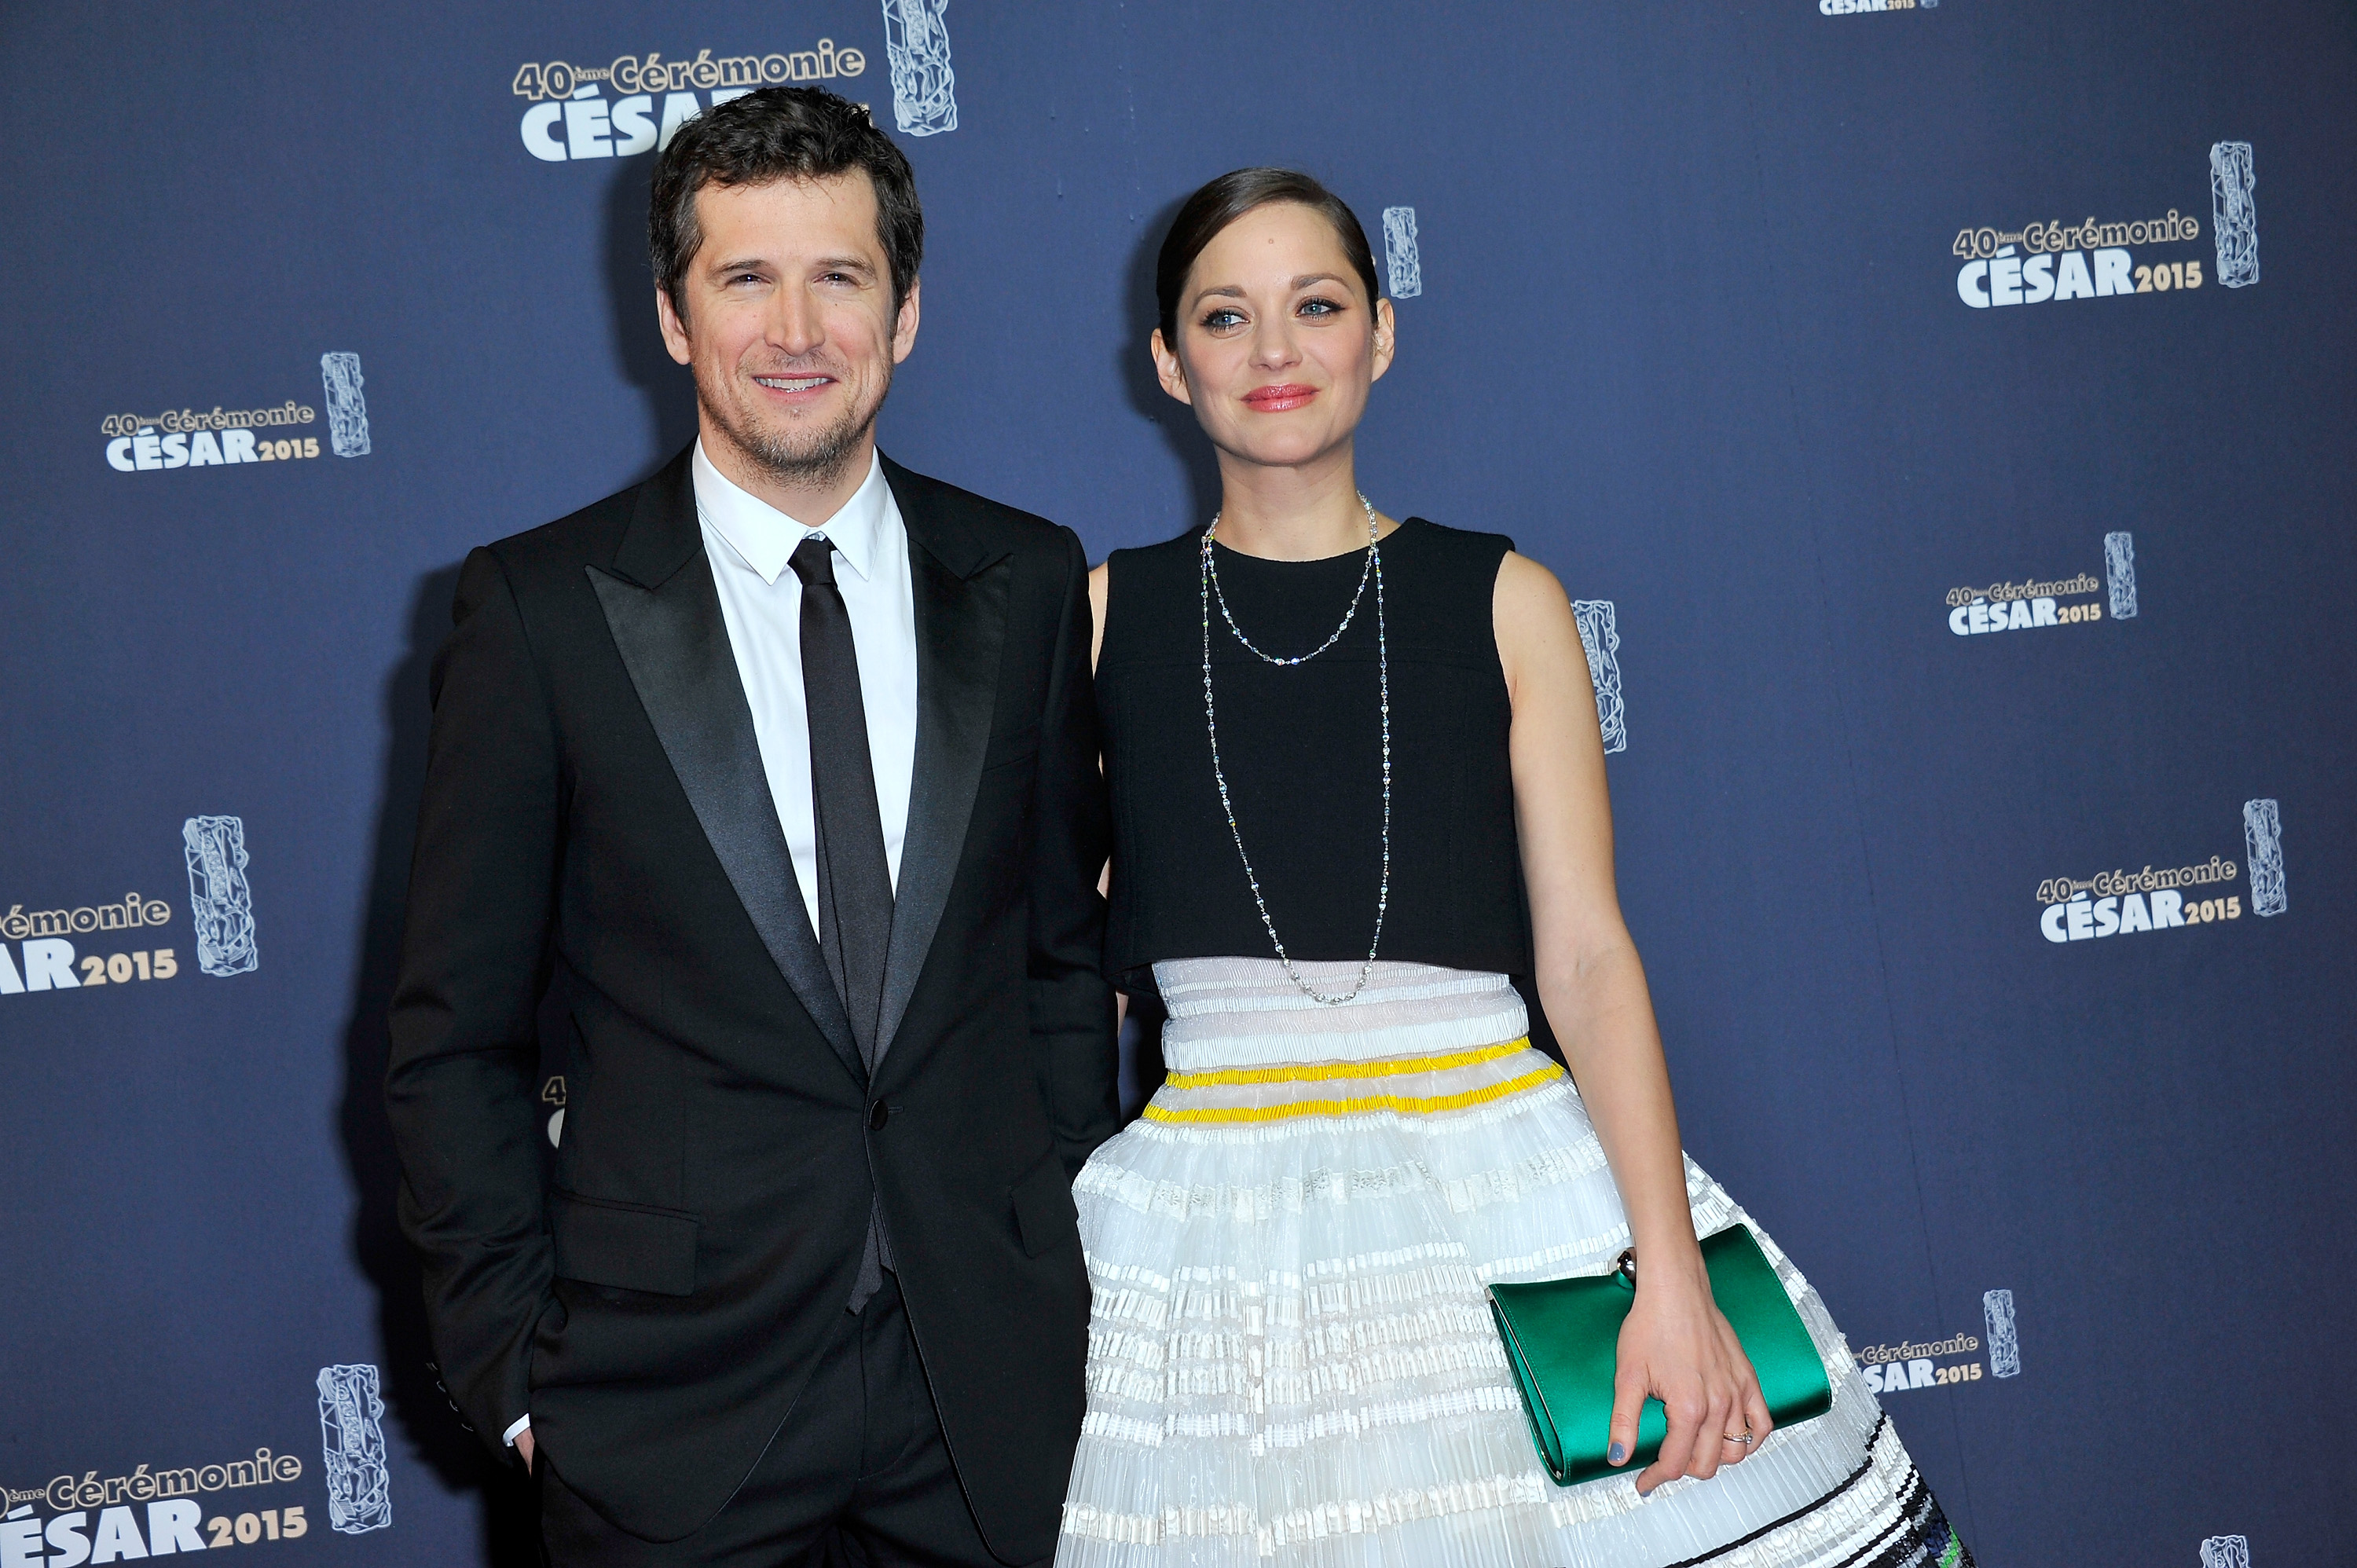 PARIS, FRANCE - Guillaume Canet and Marion Cotillard attend the 40th Cesar Film Awards at Theatre du Chatelet on February 20, 2015 in Paris, France. (Kristy Sparow/Getty Images)